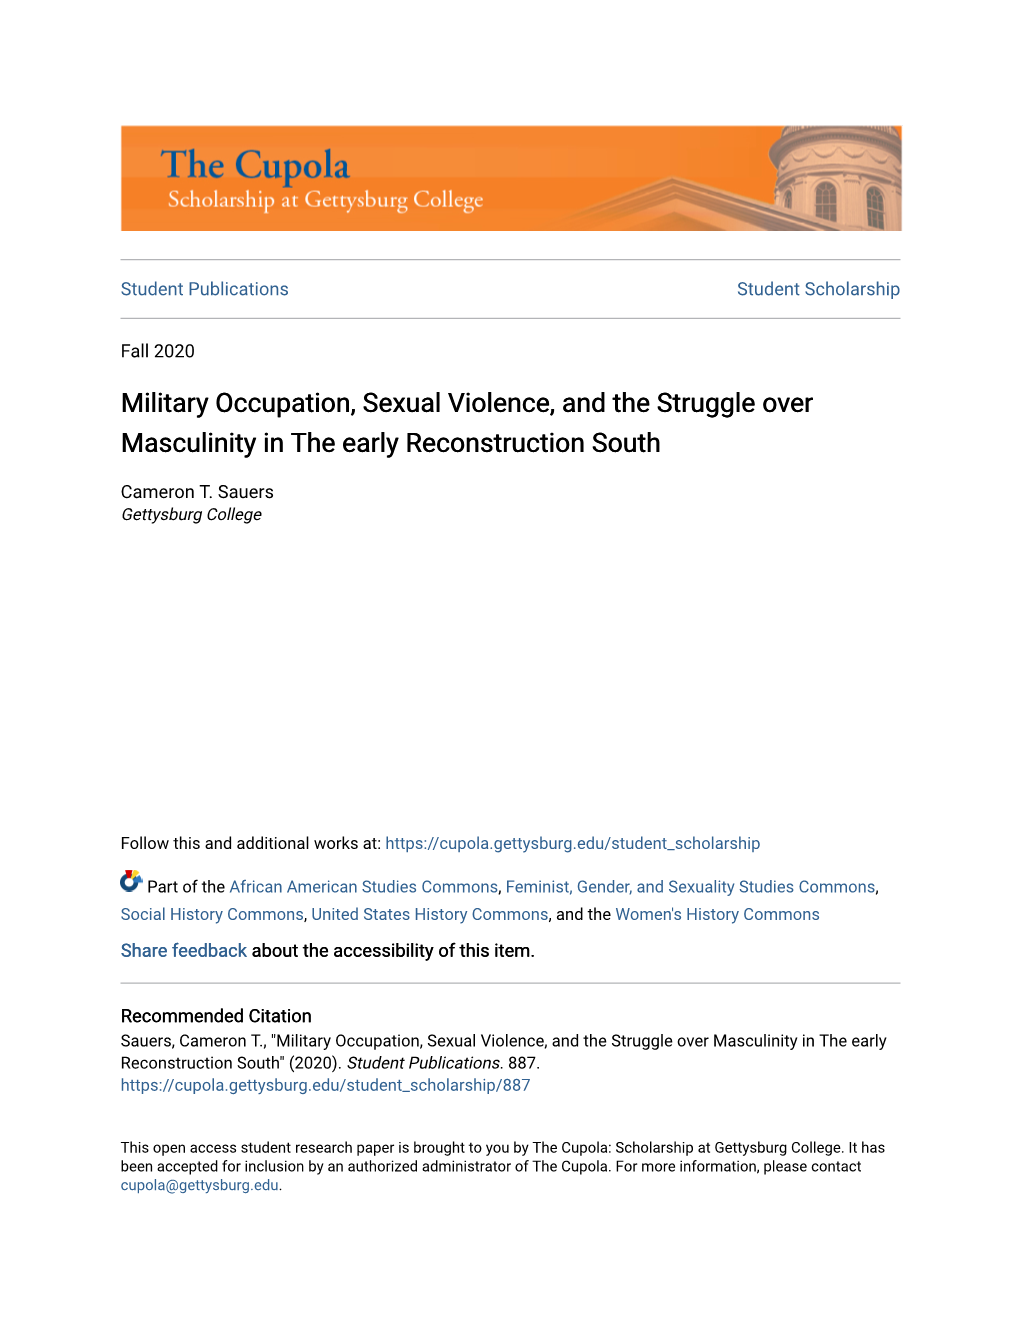 Military Occupation, Sexual Violence, and the Struggle Over Masculinity in the Early Reconstruction South